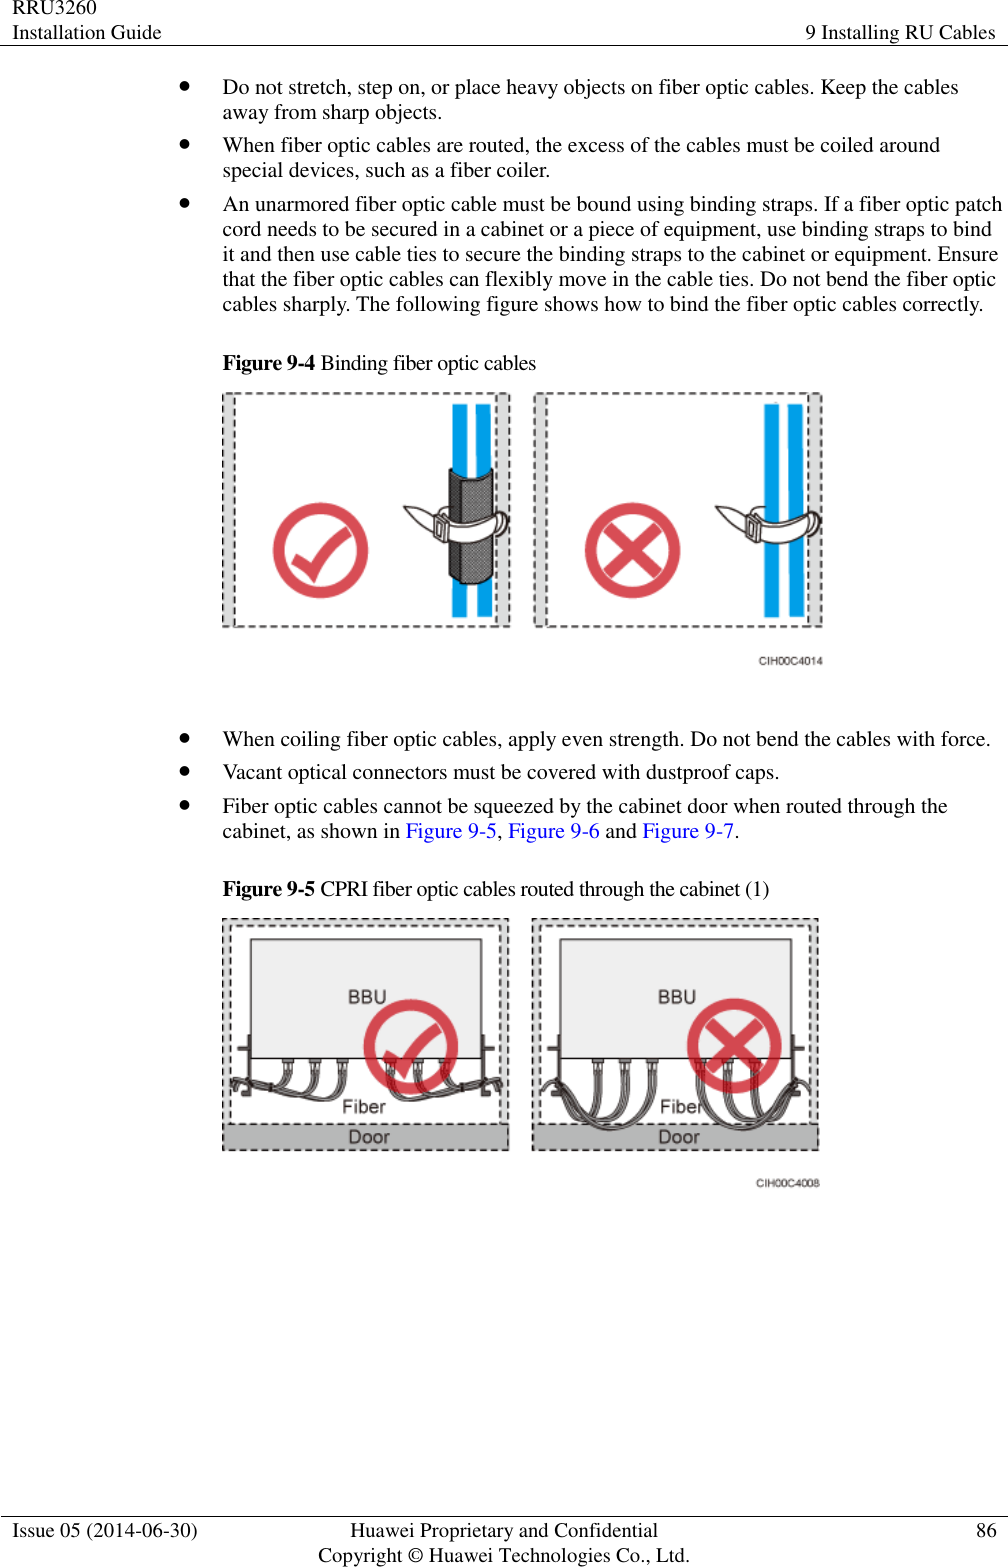 RRU3260 Installation Guide 9 Installing RU Cables  Issue 05 (2014-06-30) Huawei Proprietary and Confidential                                     Copyright © Huawei Technologies Co., Ltd. 86   Do not stretch, step on, or place heavy objects on fiber optic cables. Keep the cables away from sharp objects.  When fiber optic cables are routed, the excess of the cables must be coiled around special devices, such as a fiber coiler.  An unarmored fiber optic cable must be bound using binding straps. If a fiber optic patch cord needs to be secured in a cabinet or a piece of equipment, use binding straps to bind it and then use cable ties to secure the binding straps to the cabinet or equipment. Ensure that the fiber optic cables can flexibly move in the cable ties. Do not bend the fiber optic cables sharply. The following figure shows how to bind the fiber optic cables correctly. Figure 9-4 Binding fiber optic cables    When coiling fiber optic cables, apply even strength. Do not bend the cables with force.  Vacant optical connectors must be covered with dustproof caps.  Fiber optic cables cannot be squeezed by the cabinet door when routed through the cabinet, as shown in Figure 9-5, Figure 9-6 and Figure 9-7. Figure 9-5 CPRI fiber optic cables routed through the cabinet (1)   